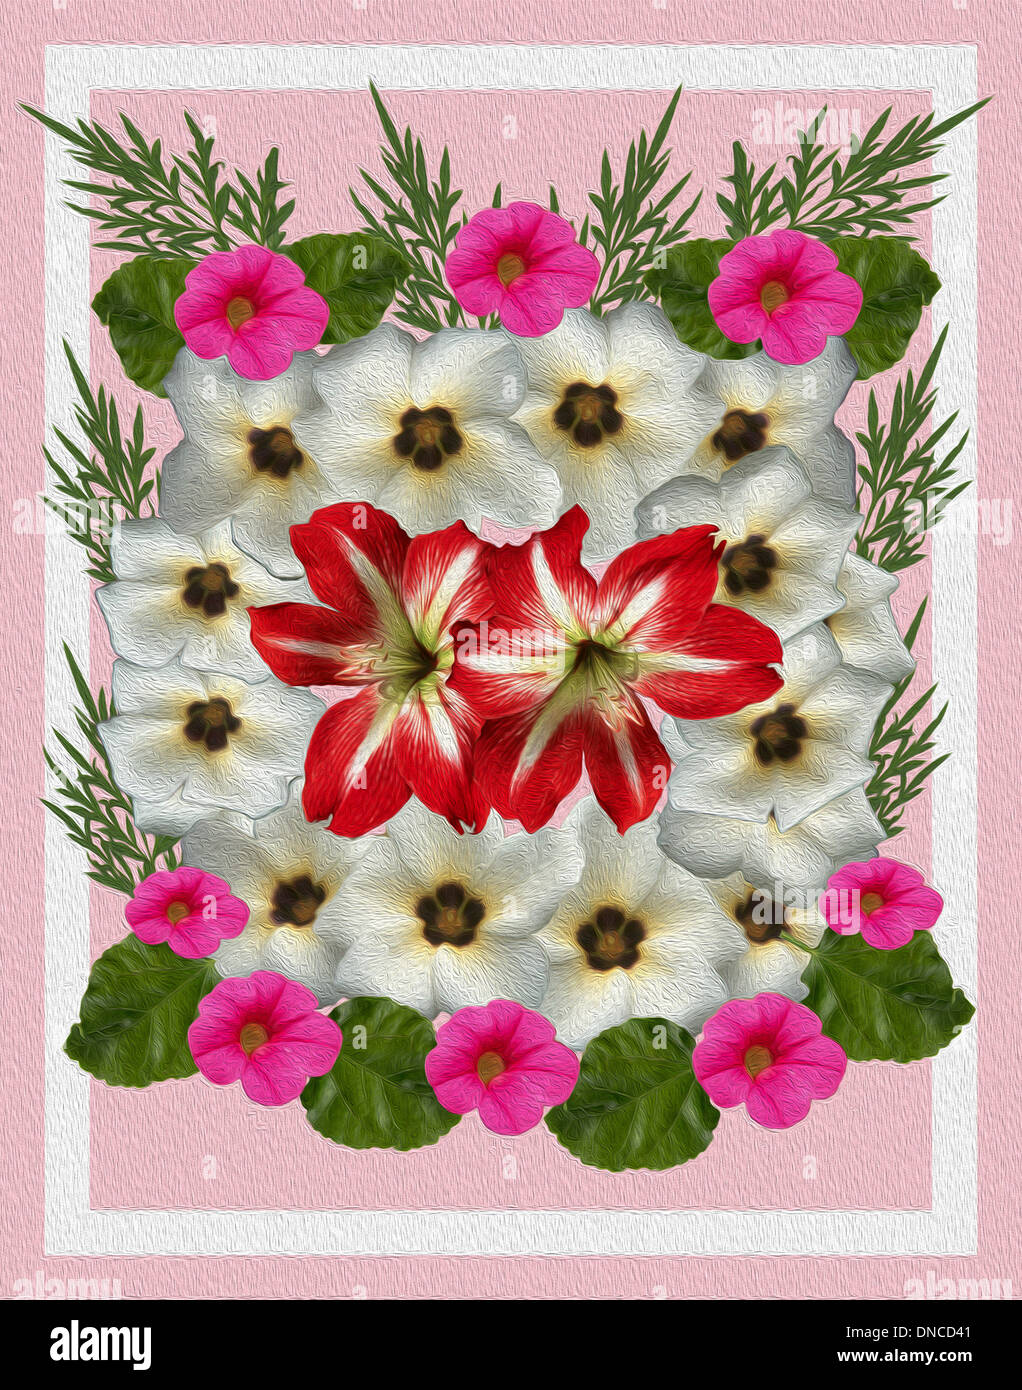 Unique digital floral art with white turnera flowers, pink petunias, red hippeastrums, and fern-like foliage against pink background with white border Stock Photo